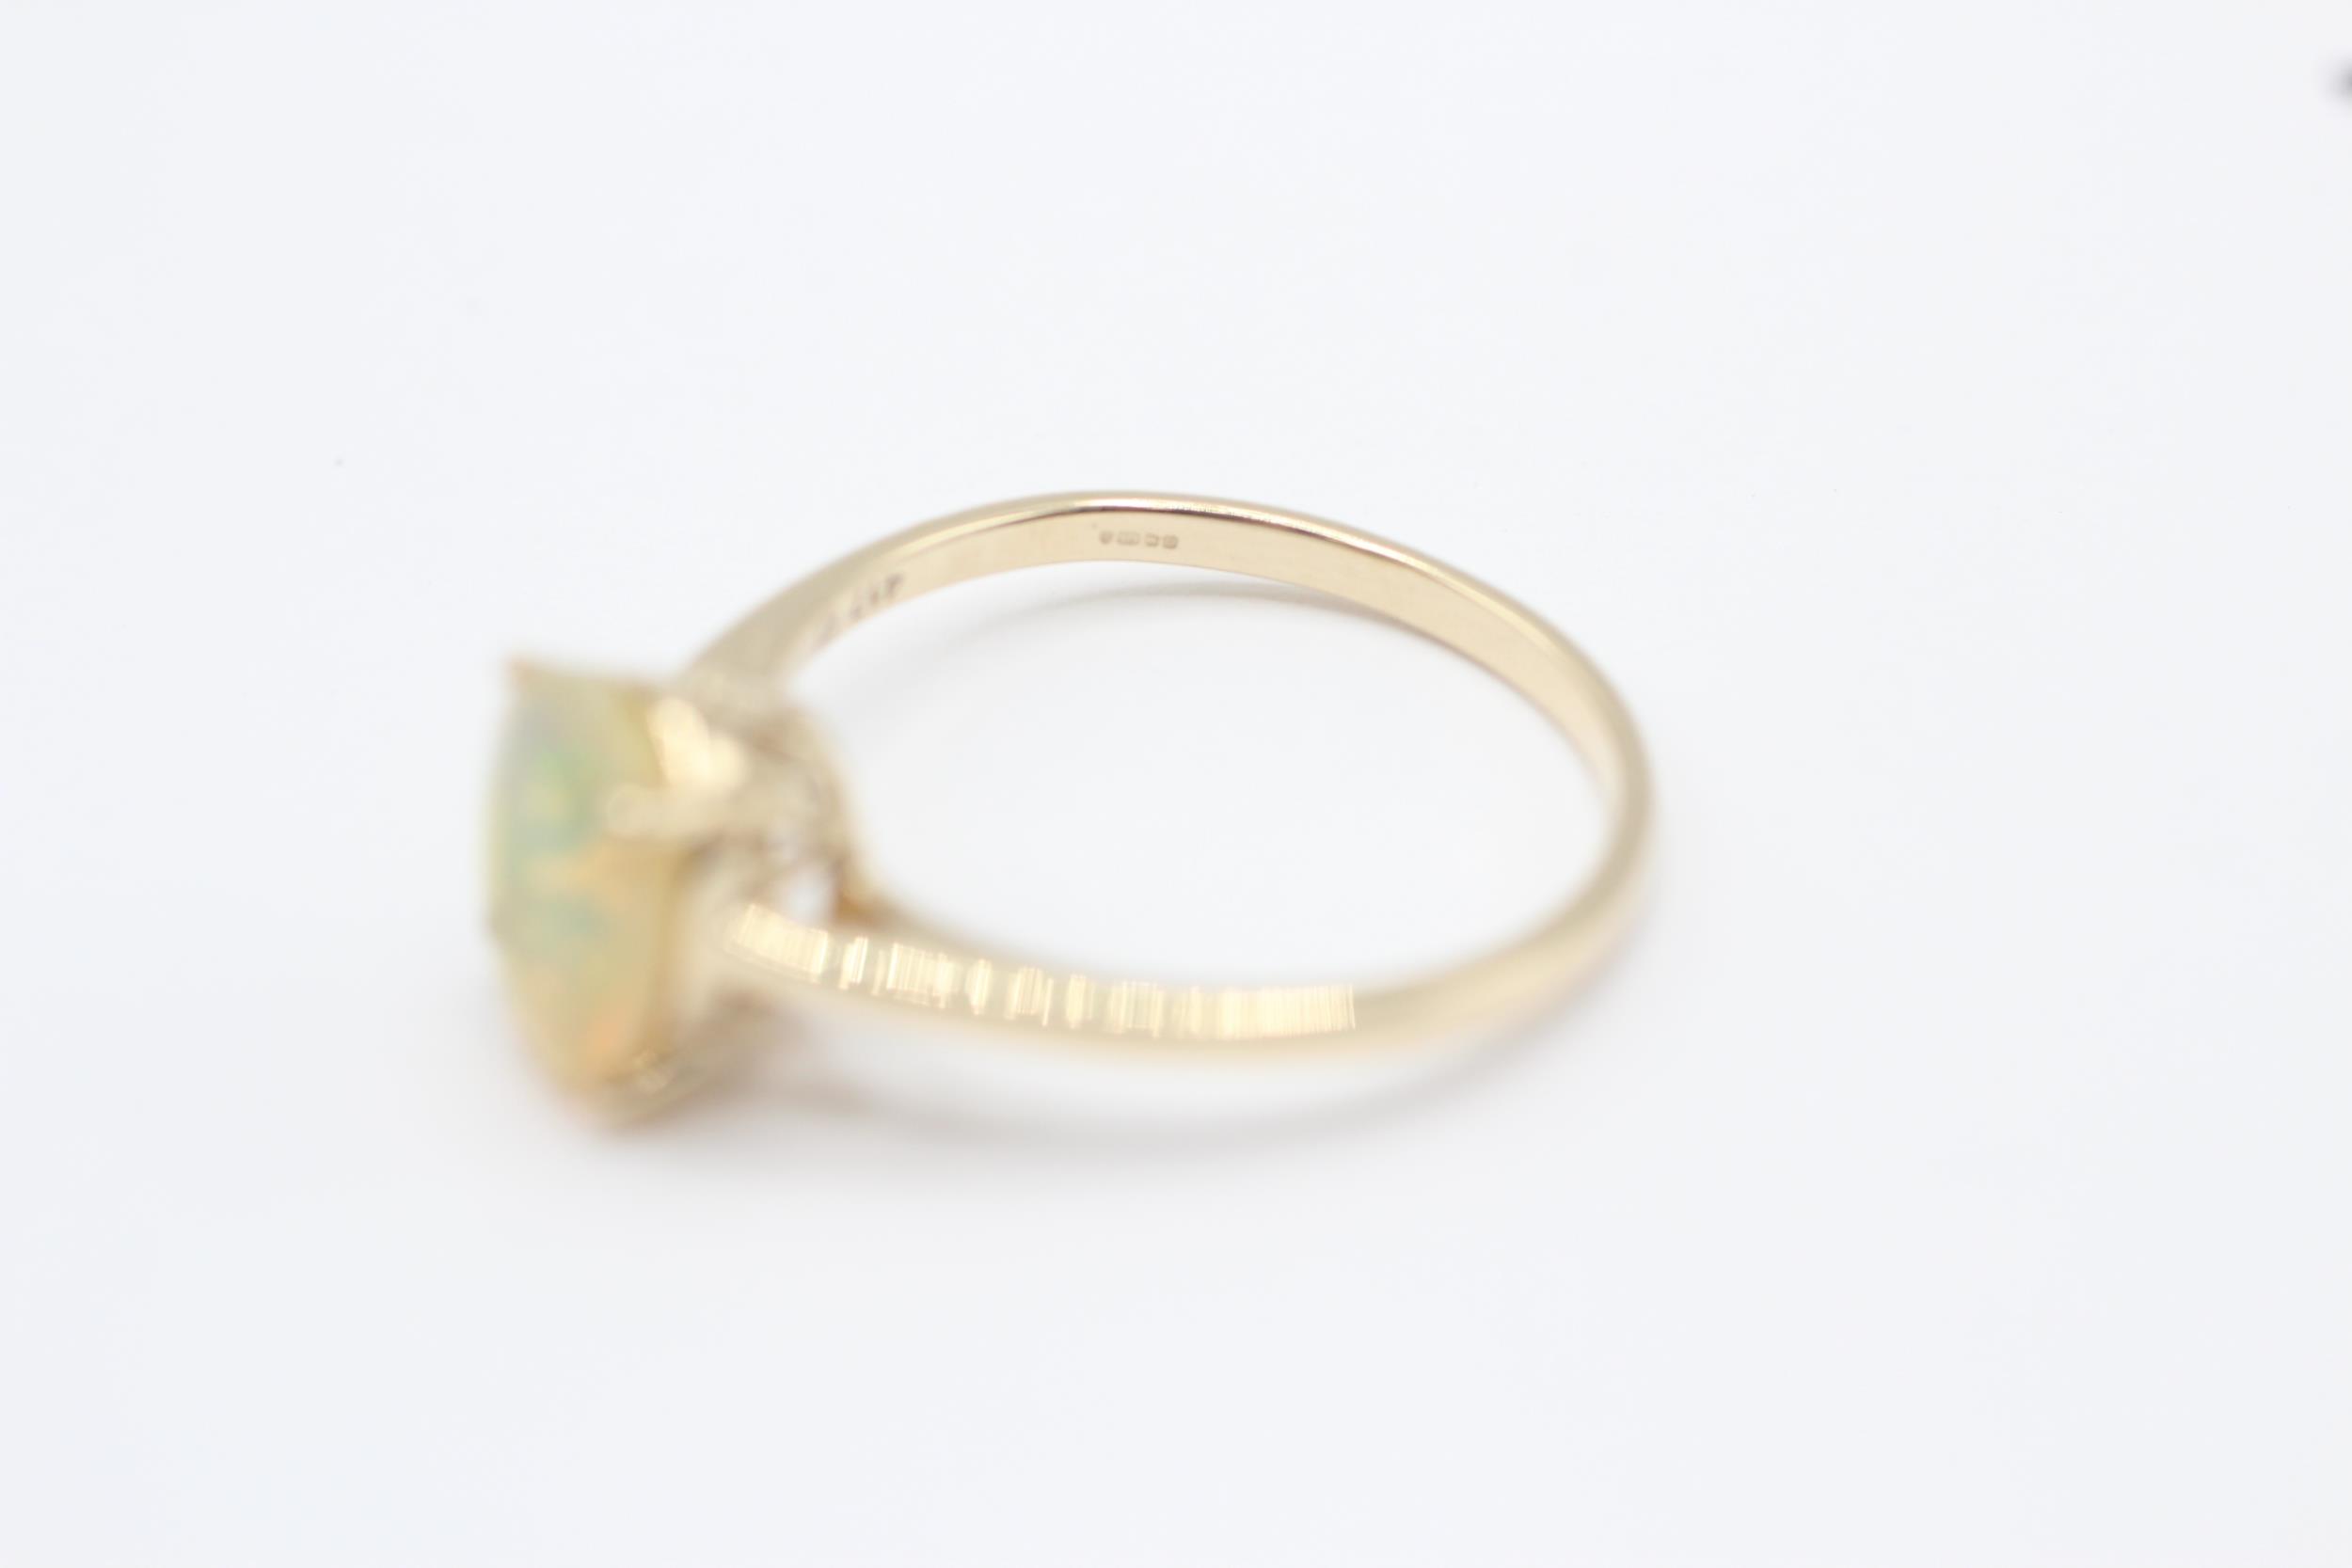 10ct gold opal singles stone ring Size S 2.4 g - Image 3 of 6